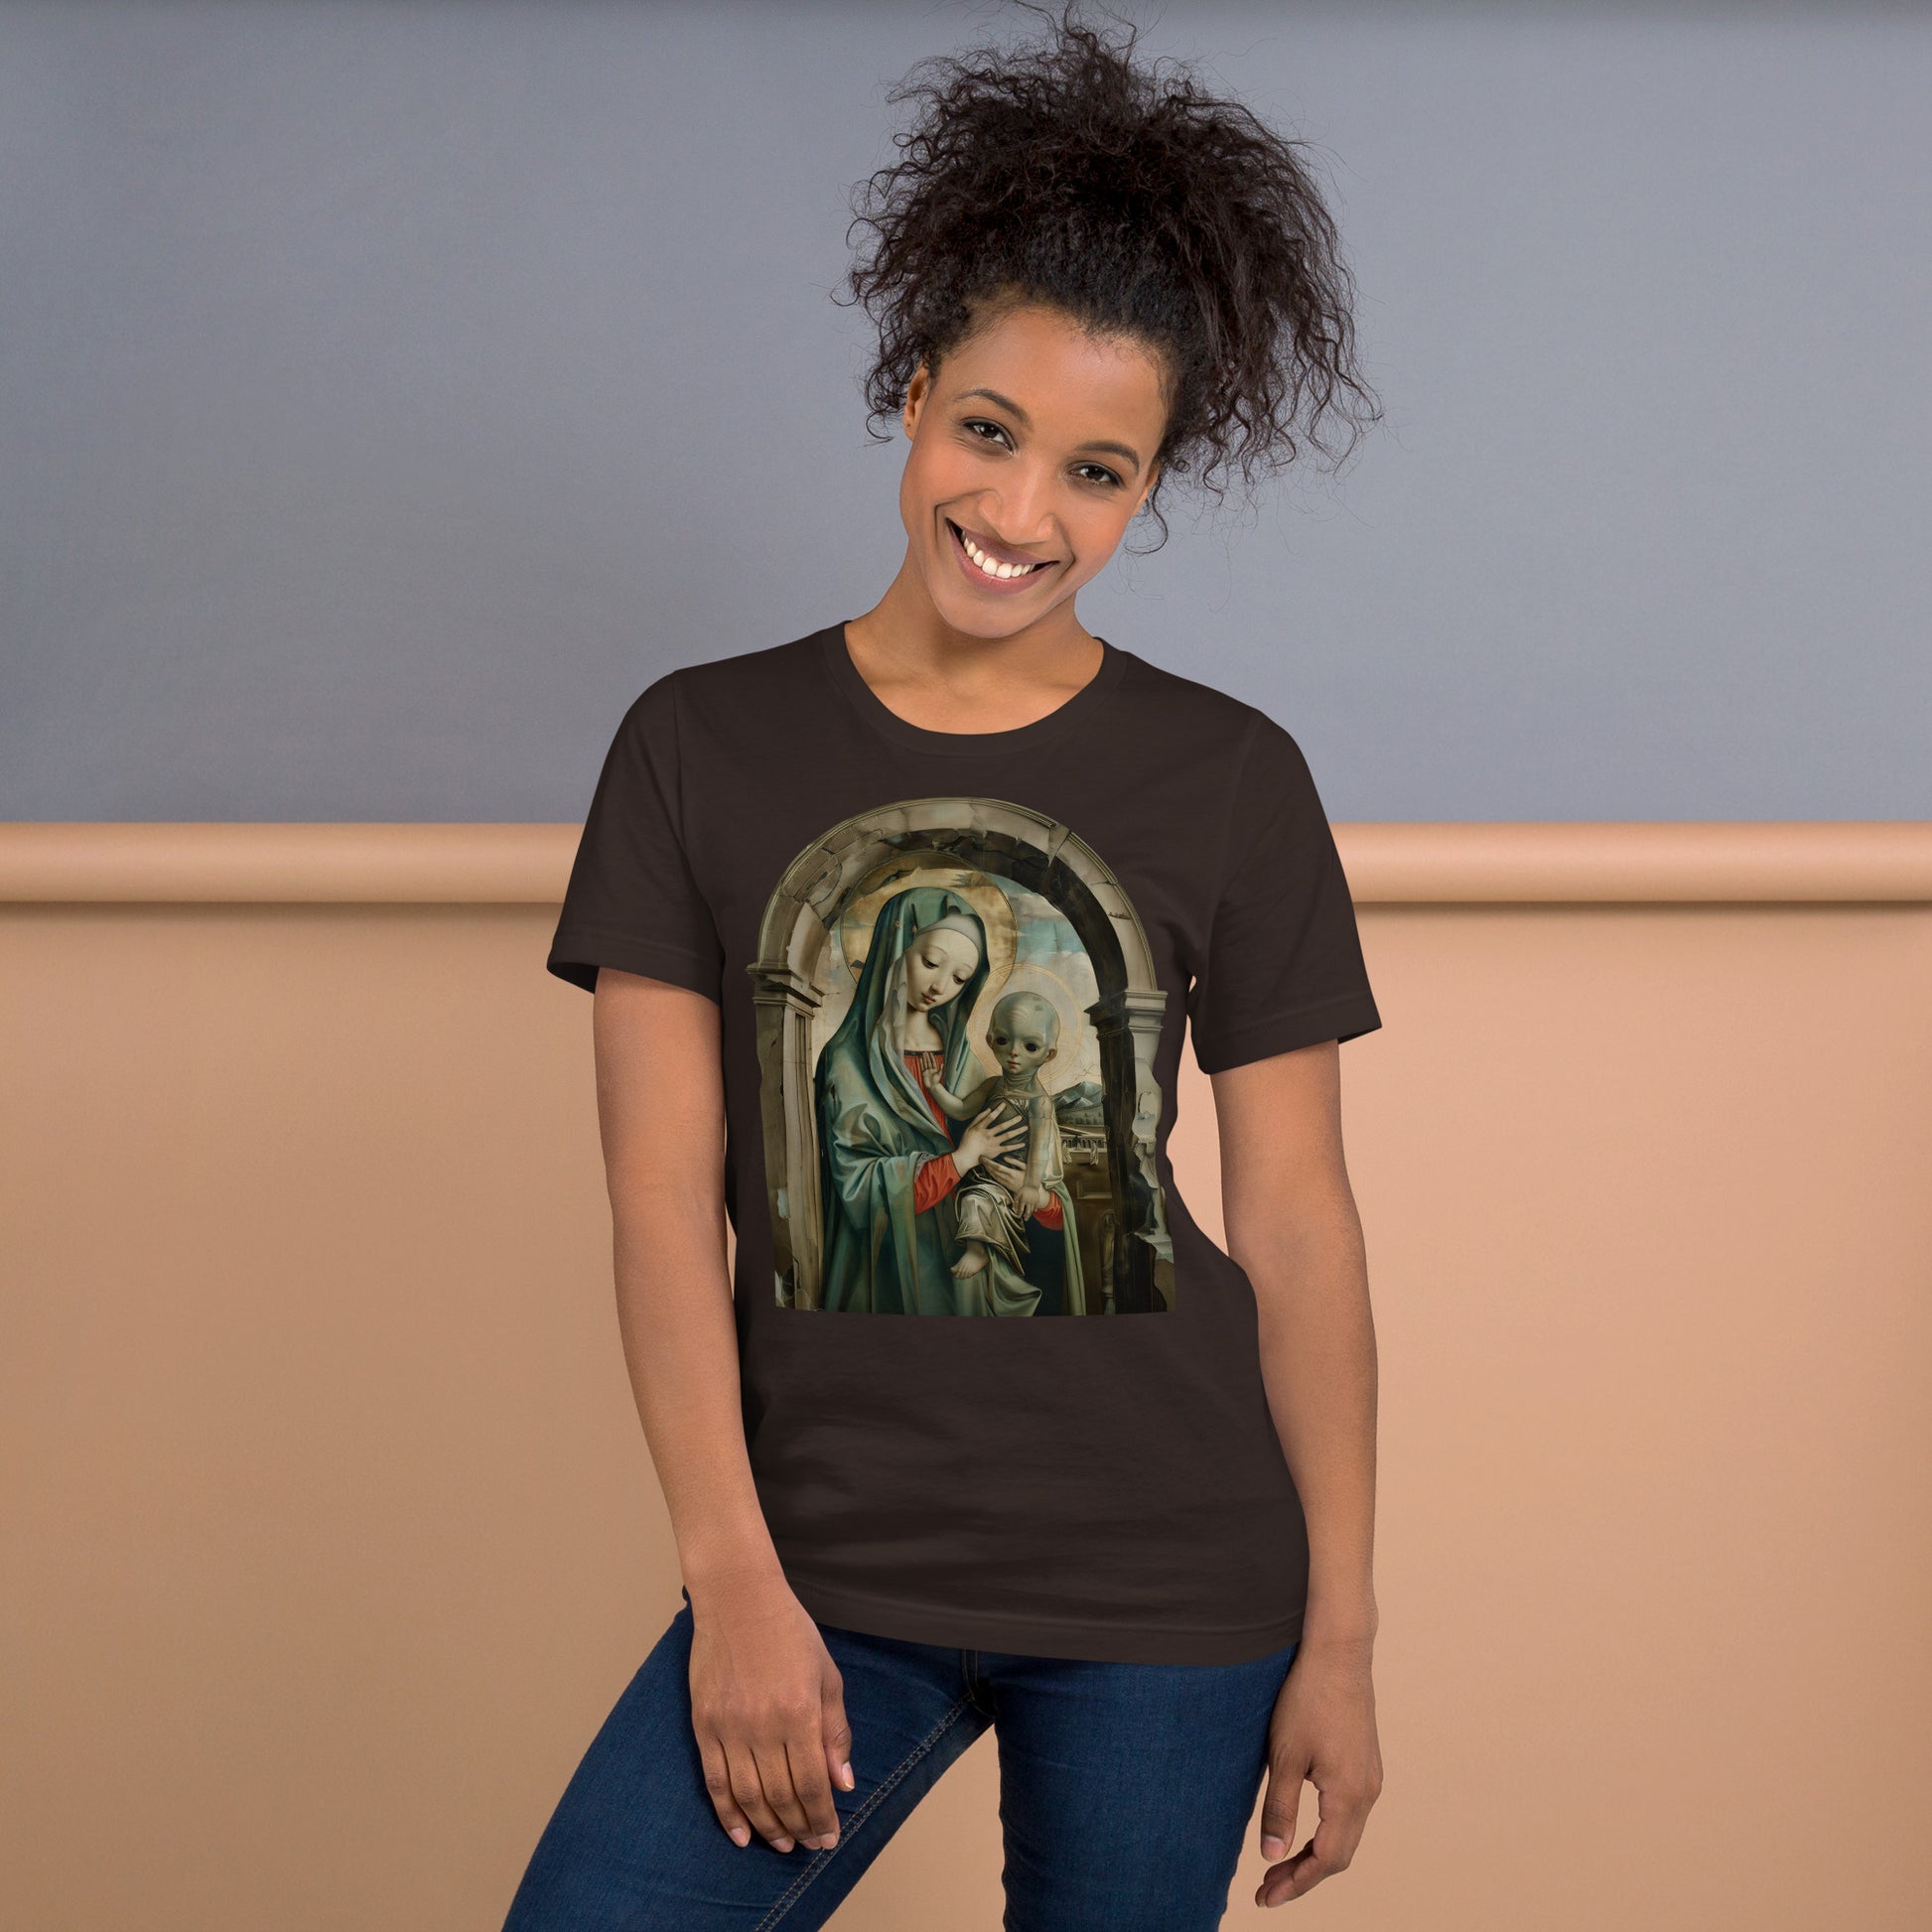 Mary and Alien Jesus Paranormal Religious Short-sleeve Unisex T-shirt Brown Mockup